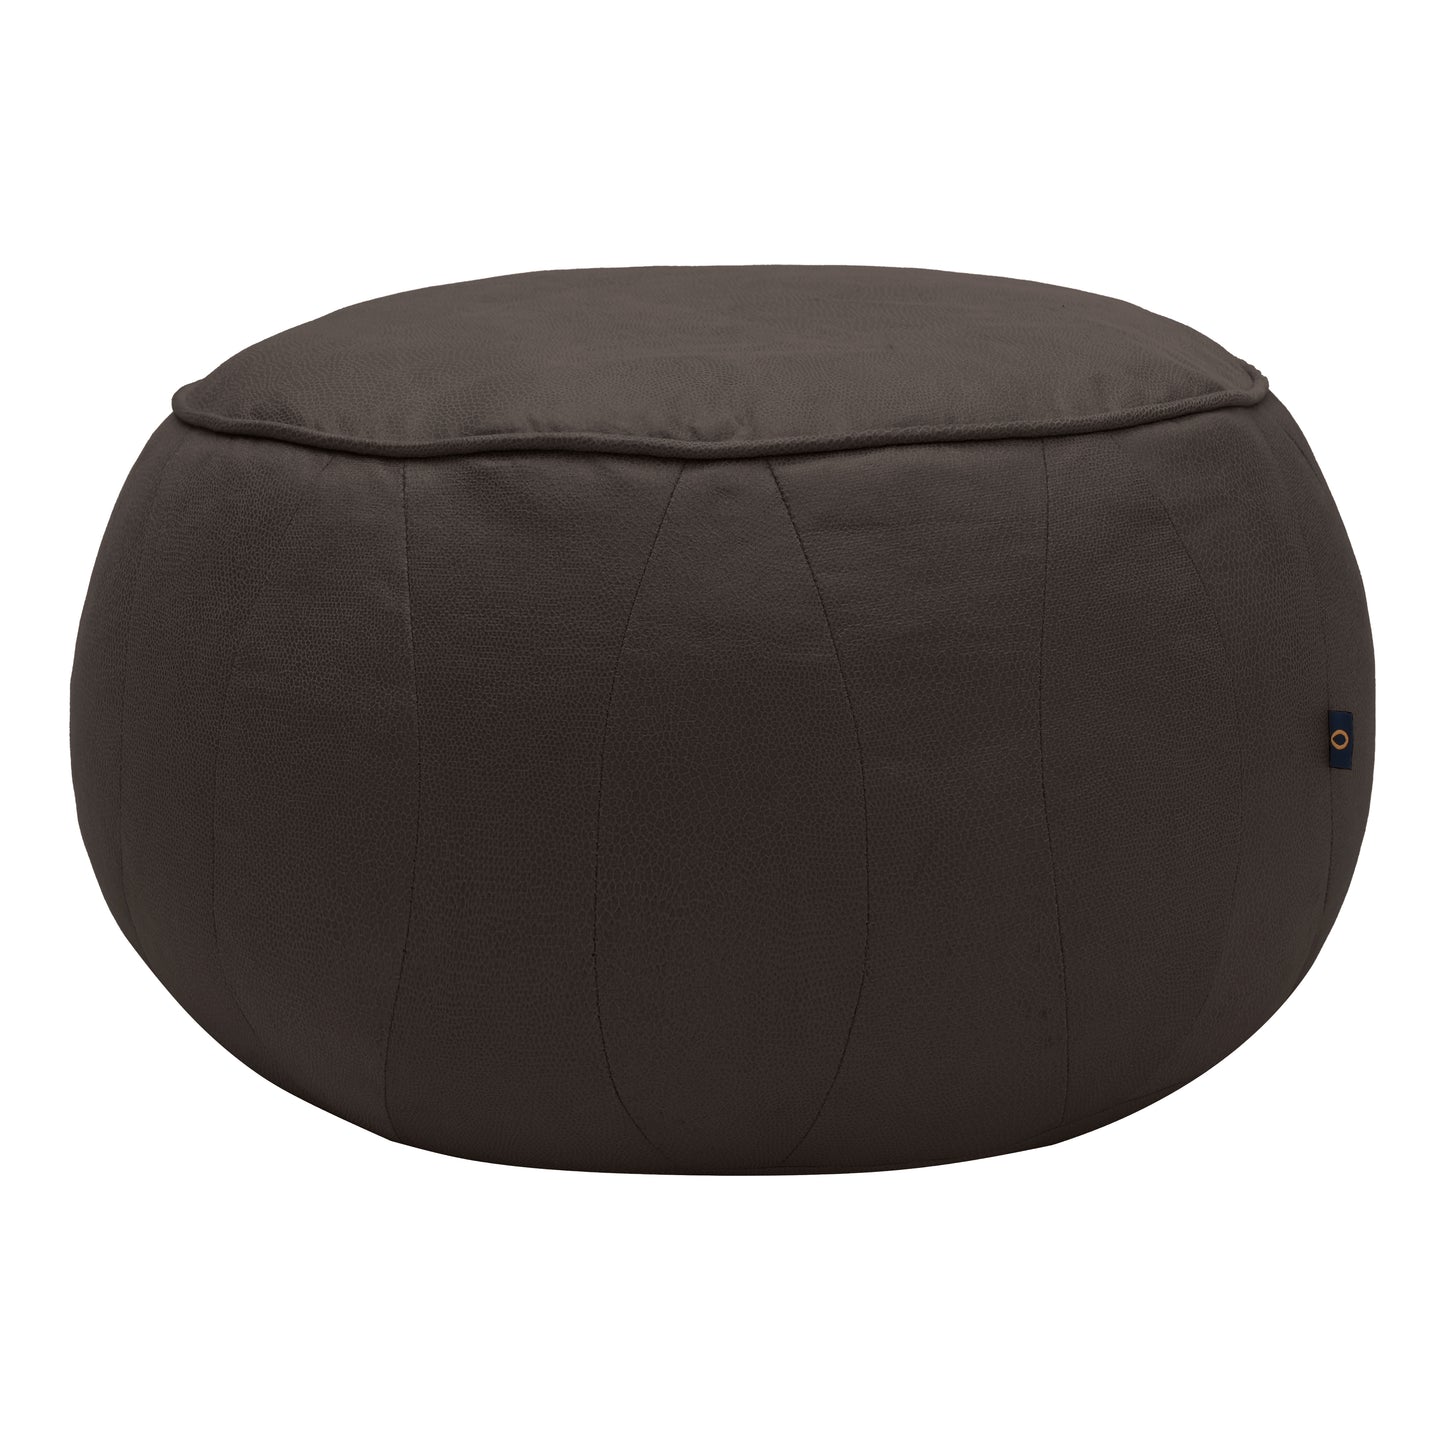 Loft 25 Round Moroccan Faux-Leather Bean Bag Footstool Pouffe